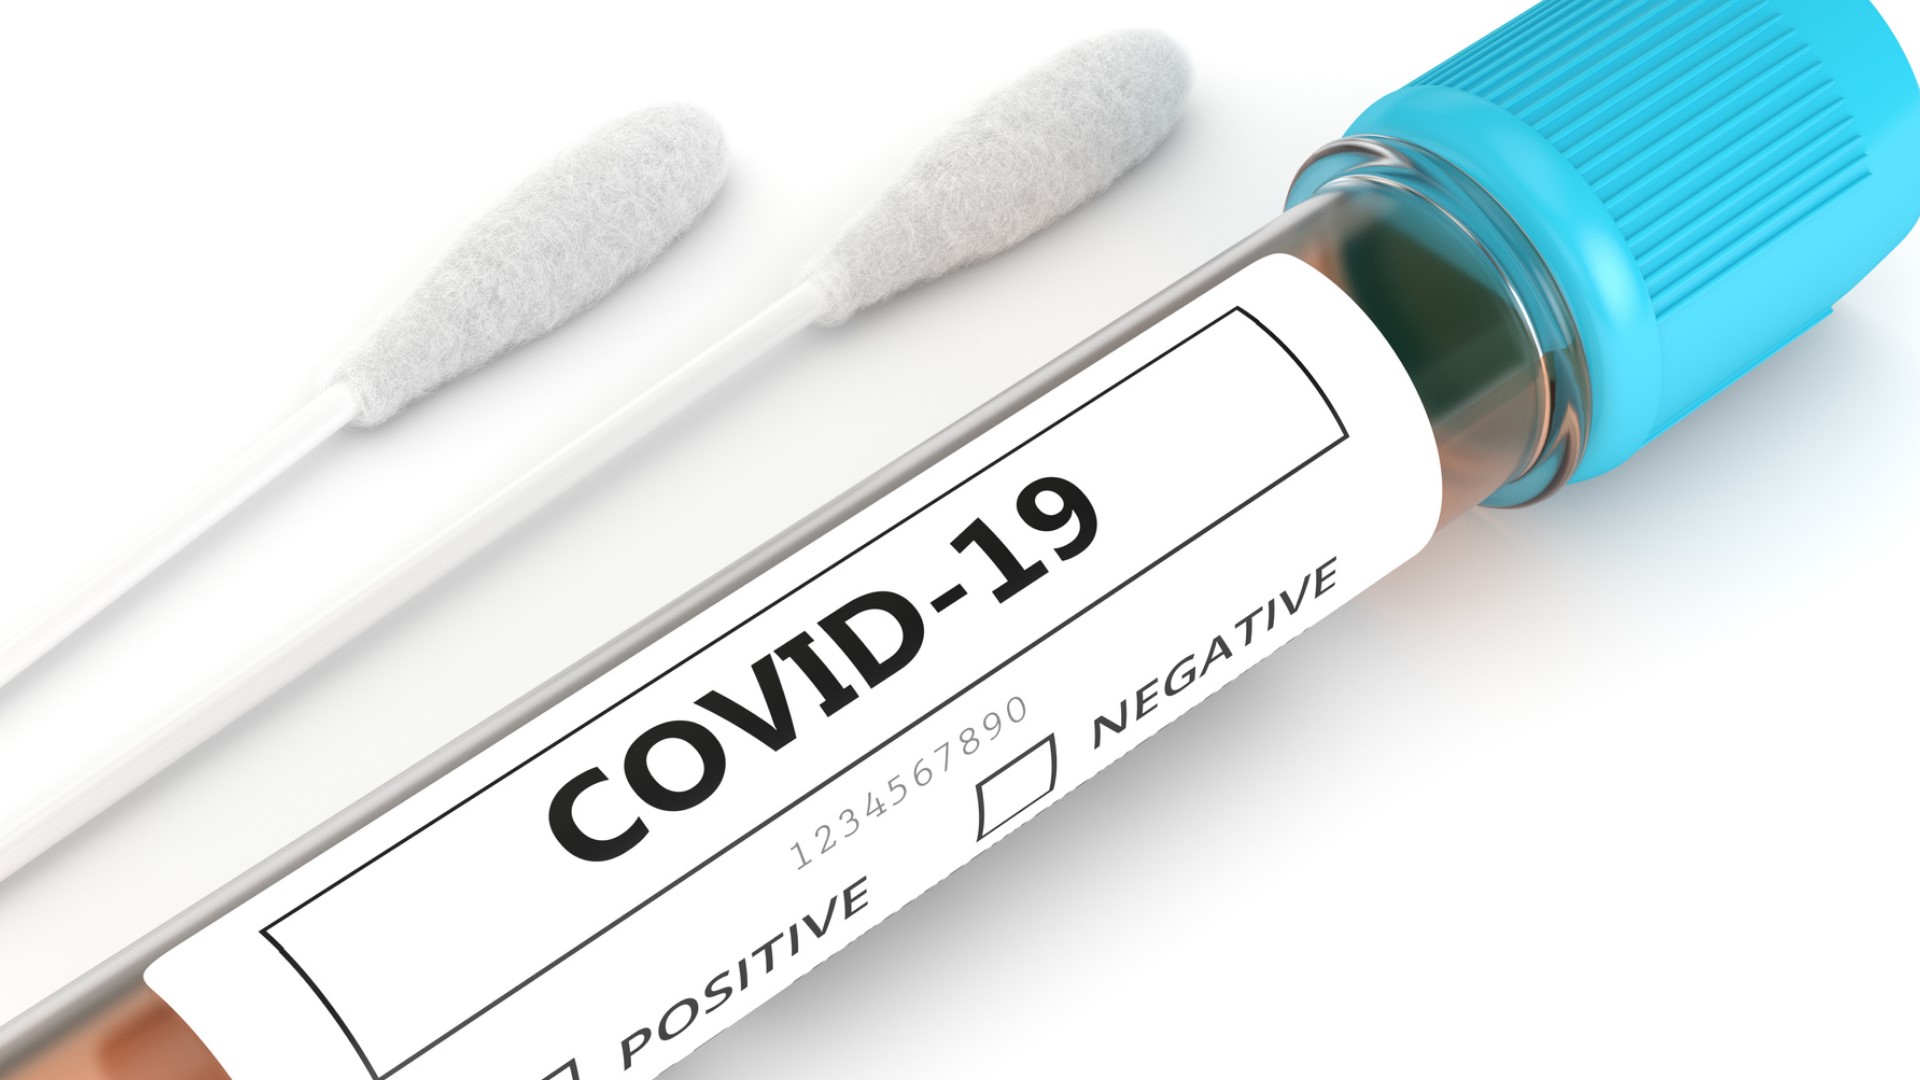 With COVID-19 cases surging, tests are once again in high demand. And many people are looking for an easier option than the hours-long wait at a clinic.